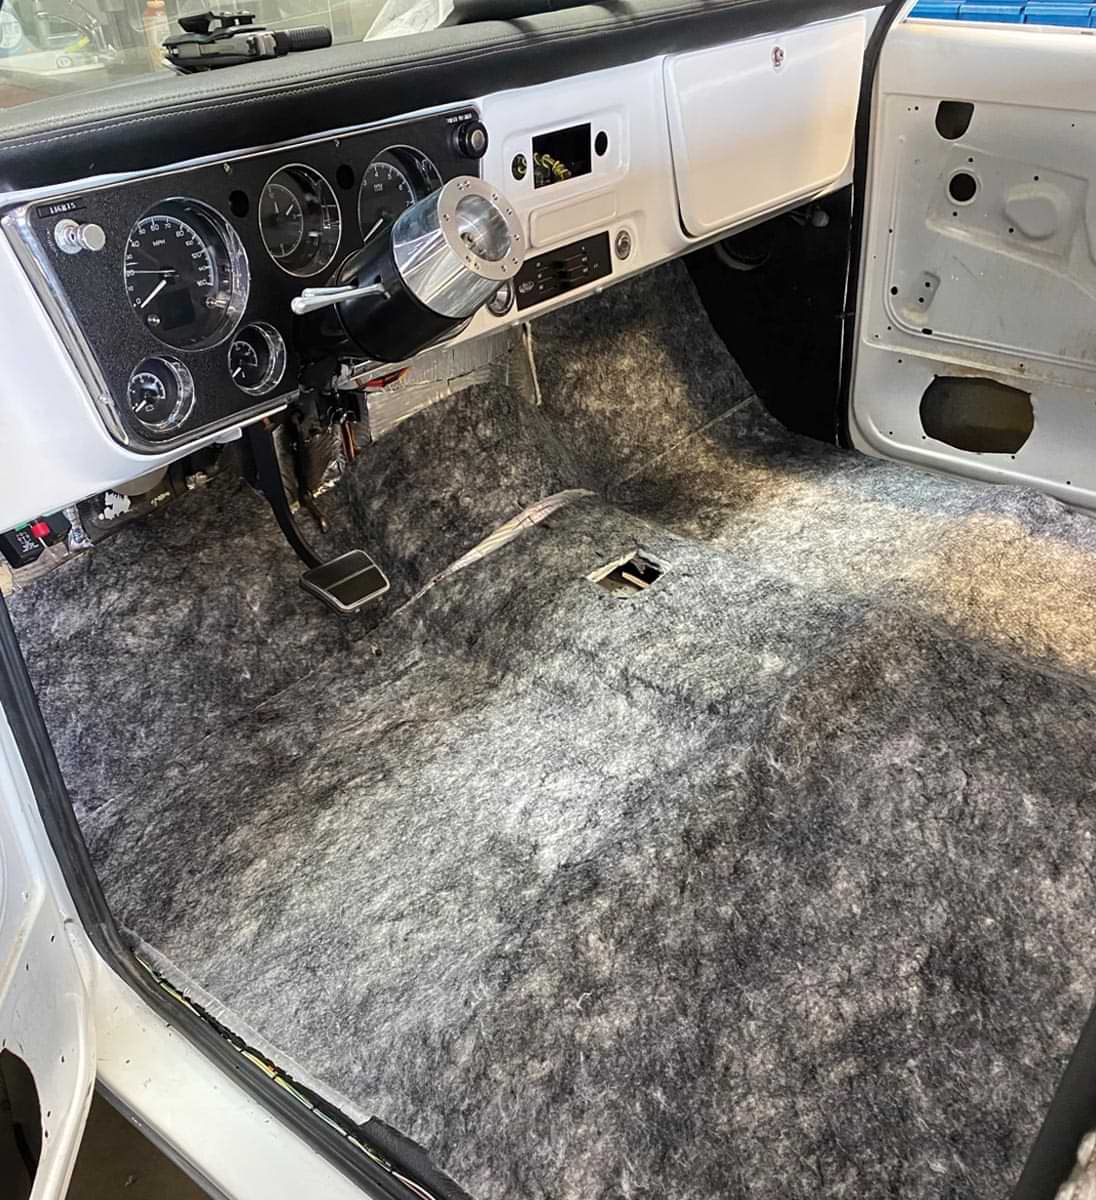 view inside the cab from the drivers side, showing the floor lined with Under Carpet Lite material